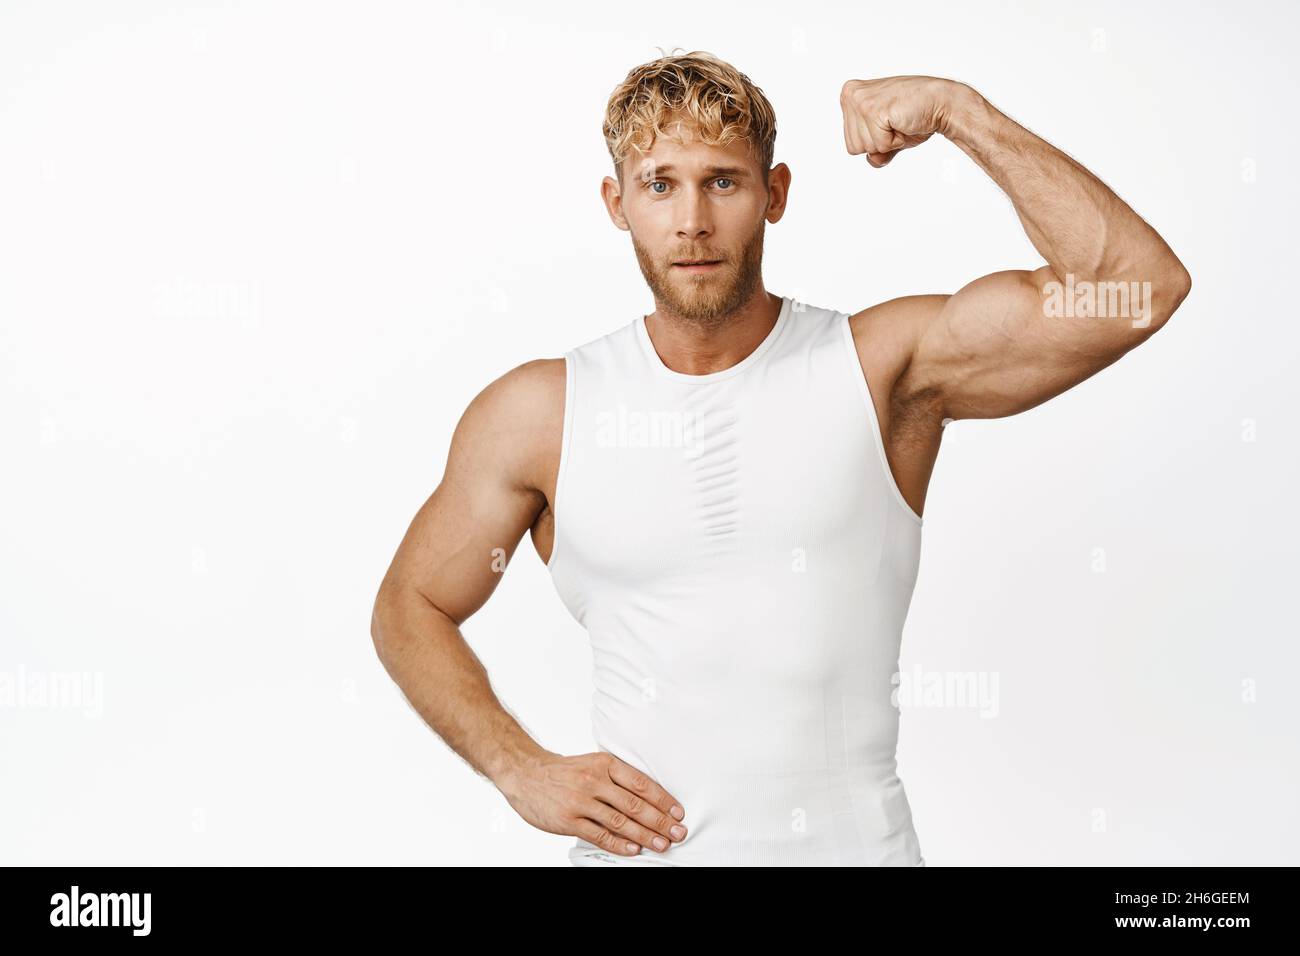 Portrait of strong and handsome young athlete showing his muscle on arm, flexing biceps and looking confident, white background Stock Photo